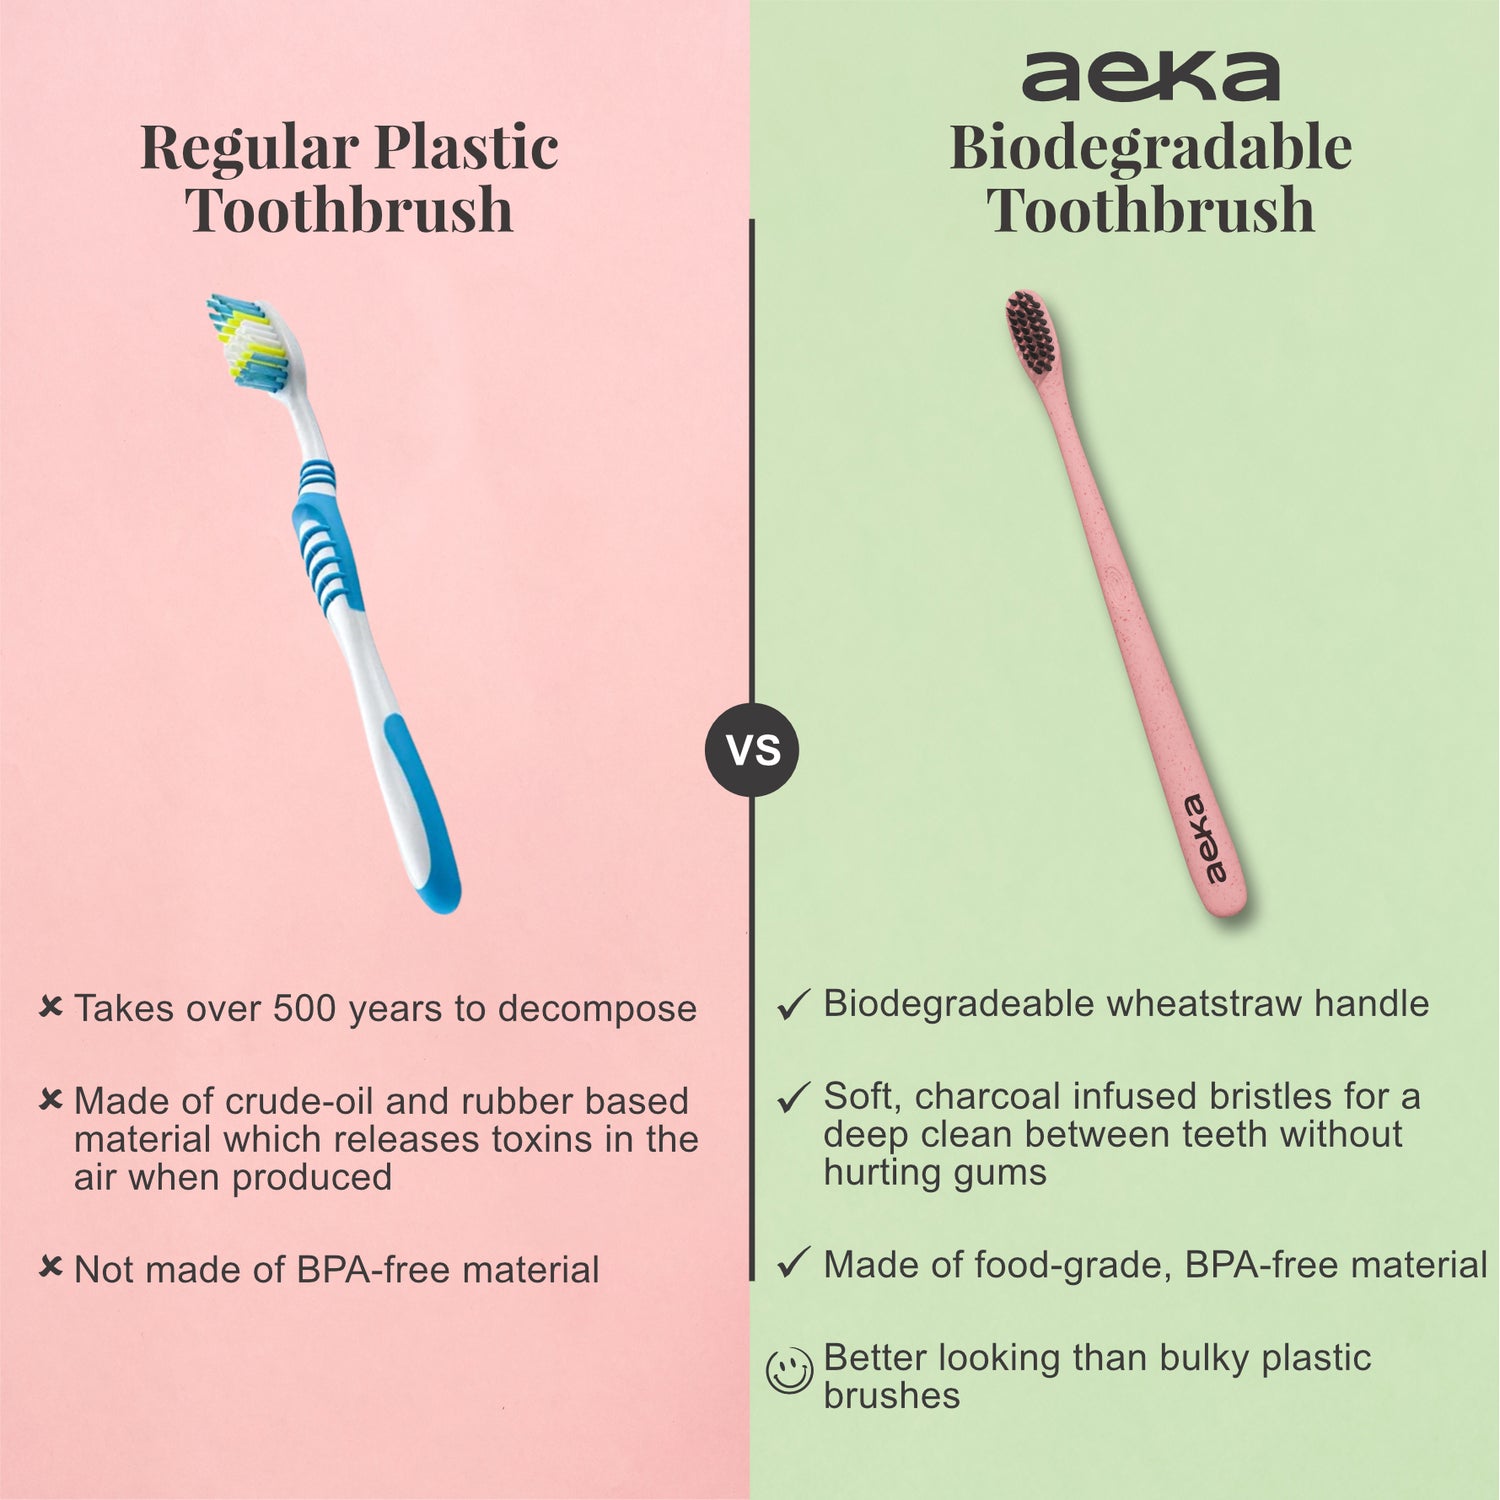 Aeka Biodegradable Toothbrush | Wheat Straw Handle - Pack of 2 (Green &amp; Blue)